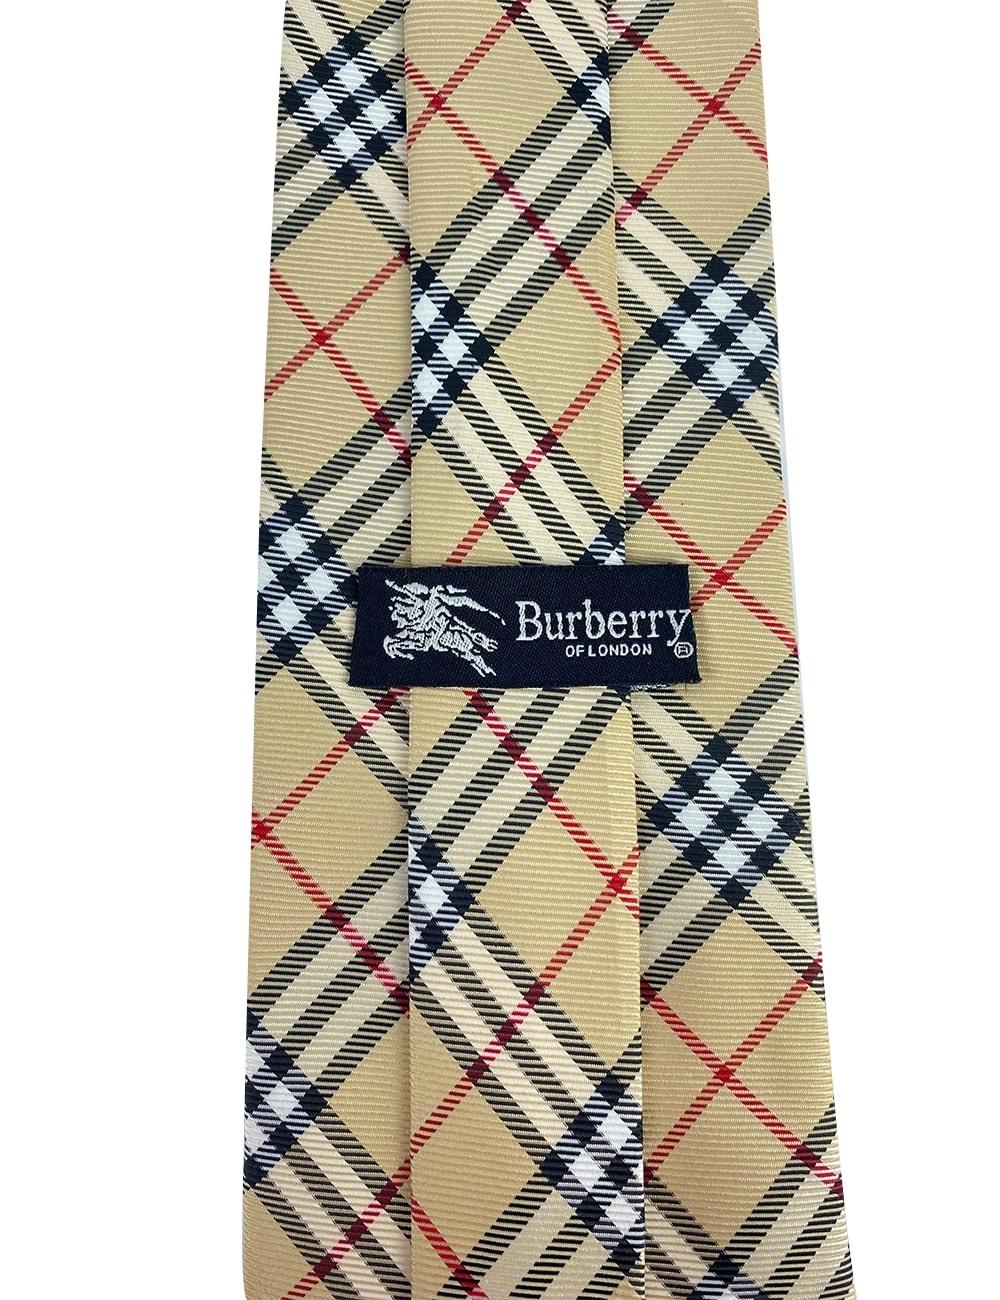 Burberry Vintage Signature House Check Tie

Additional information:
Material: Silk
Overall condition: Very Good